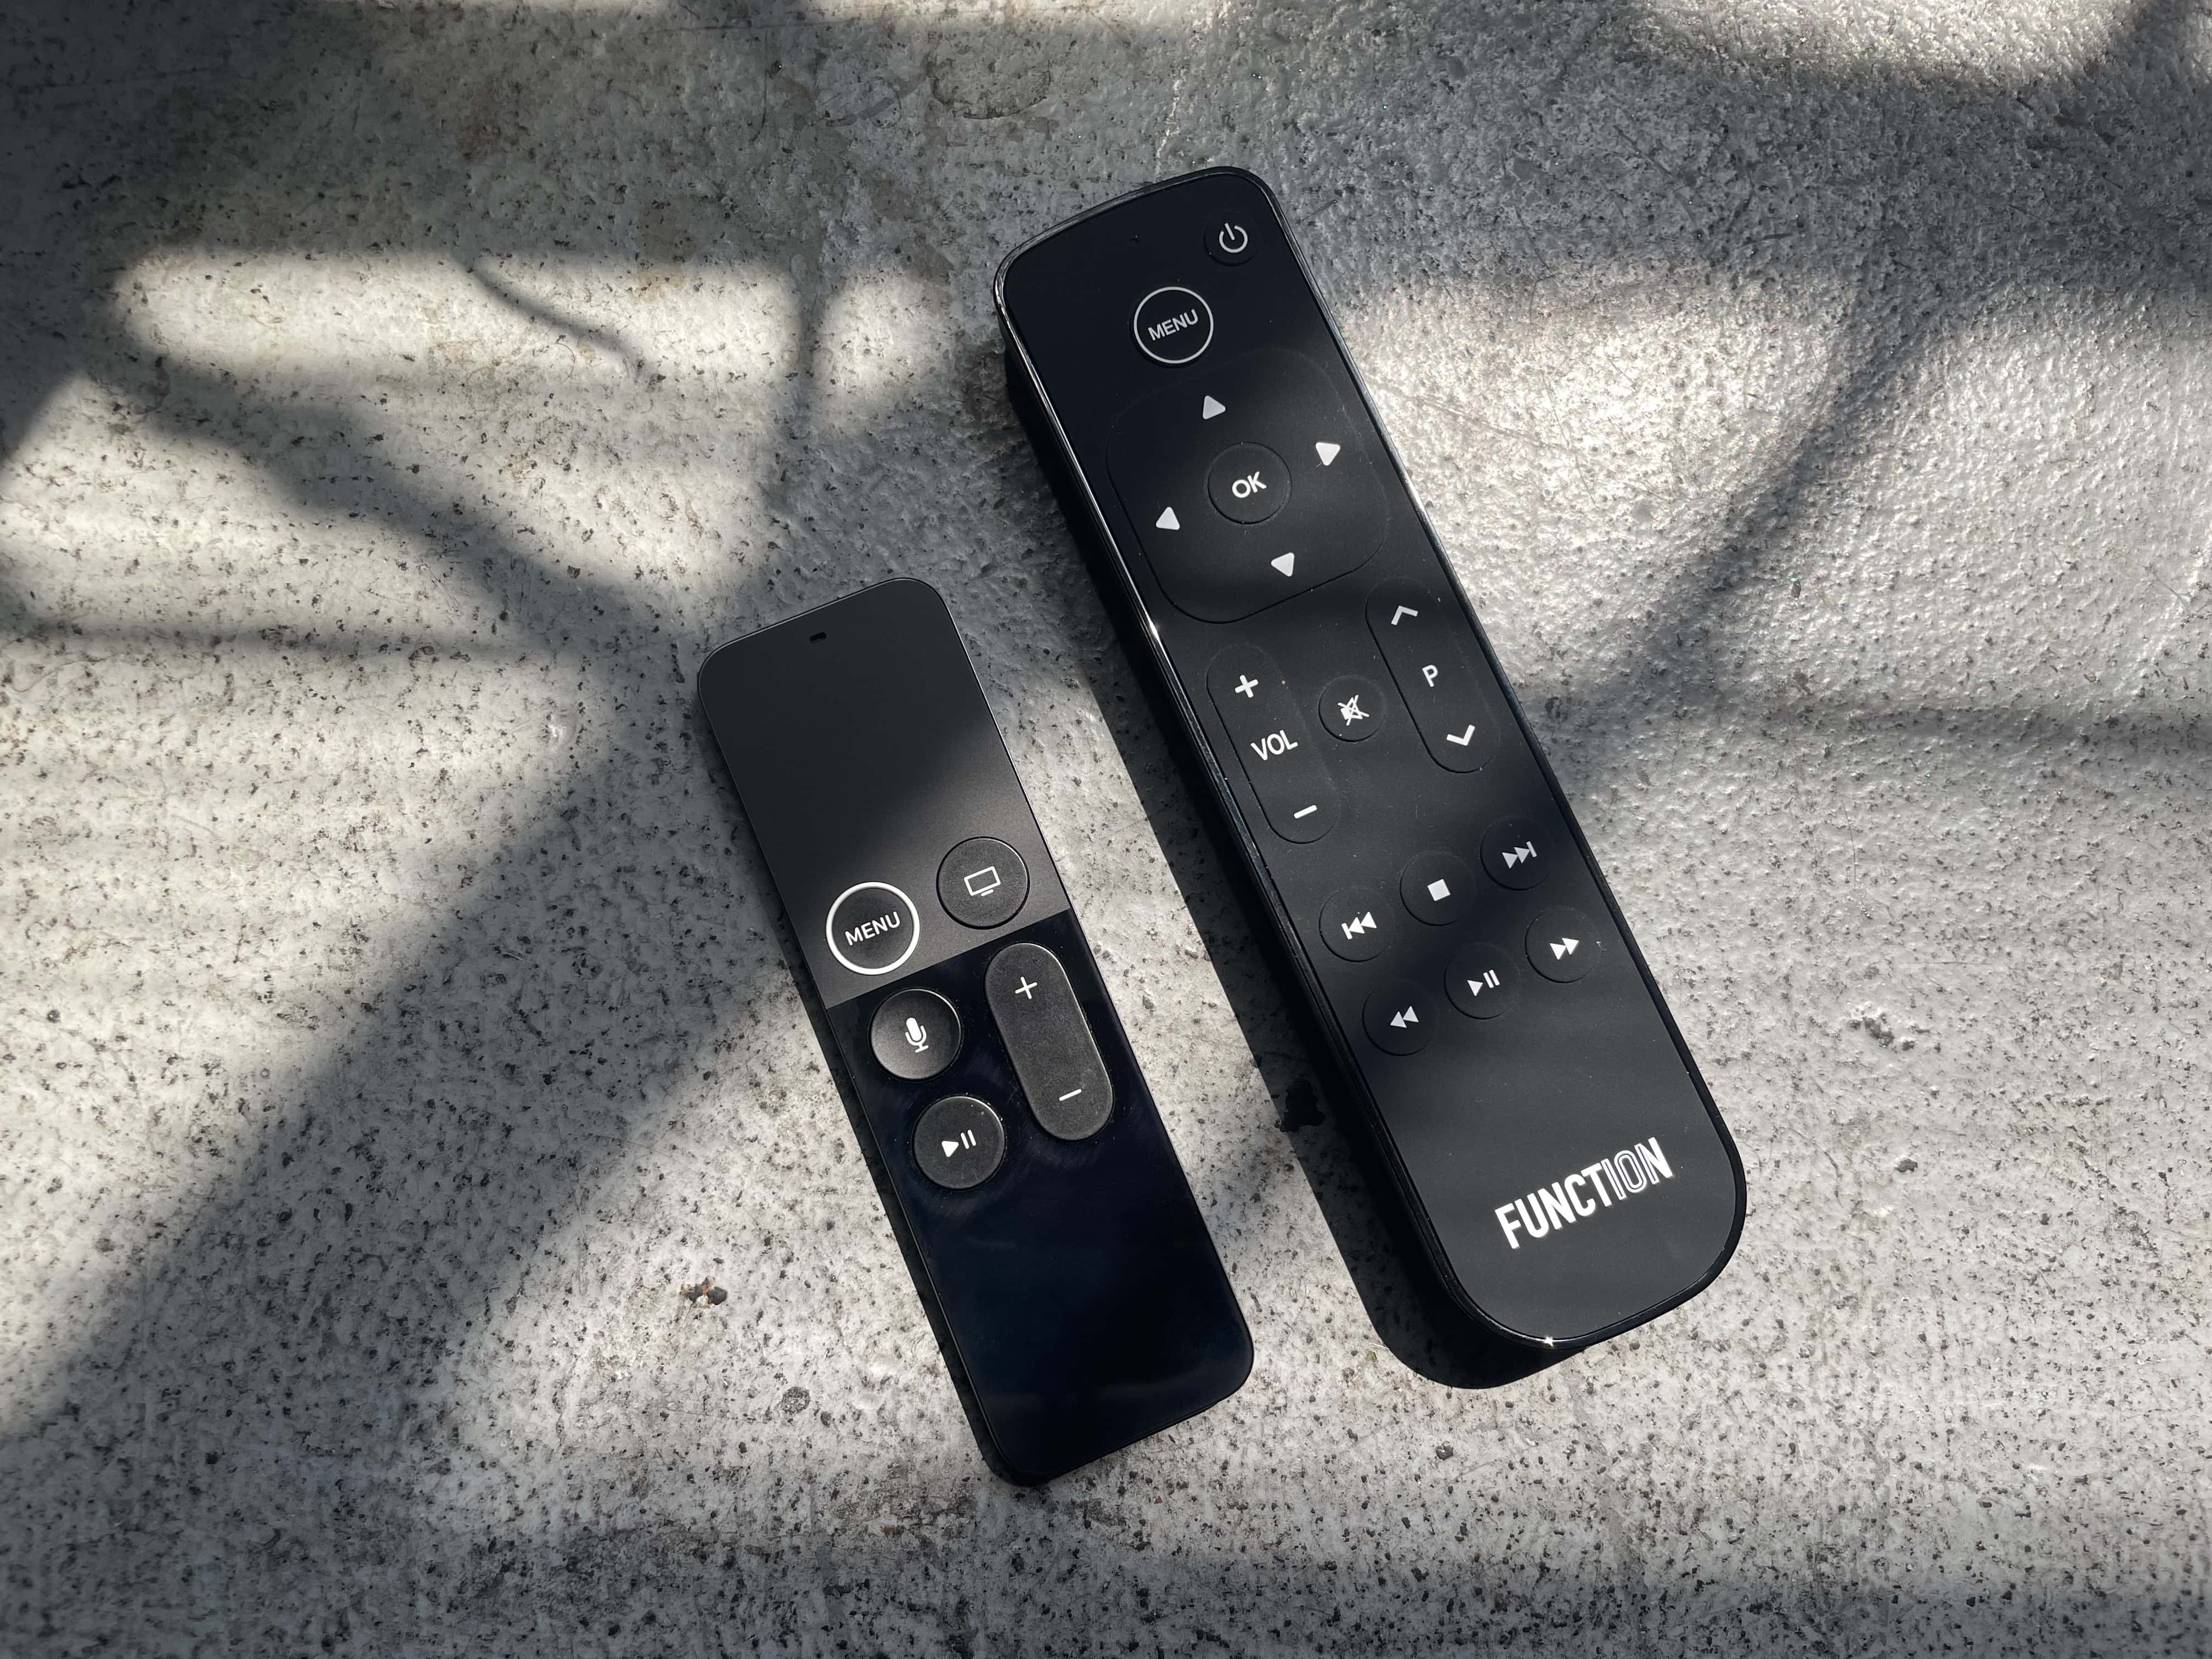 Function 101 Button Remote review: Function 101's remote is bigger than the Siri Remote, making it easier to use and find among the cushions of the couch